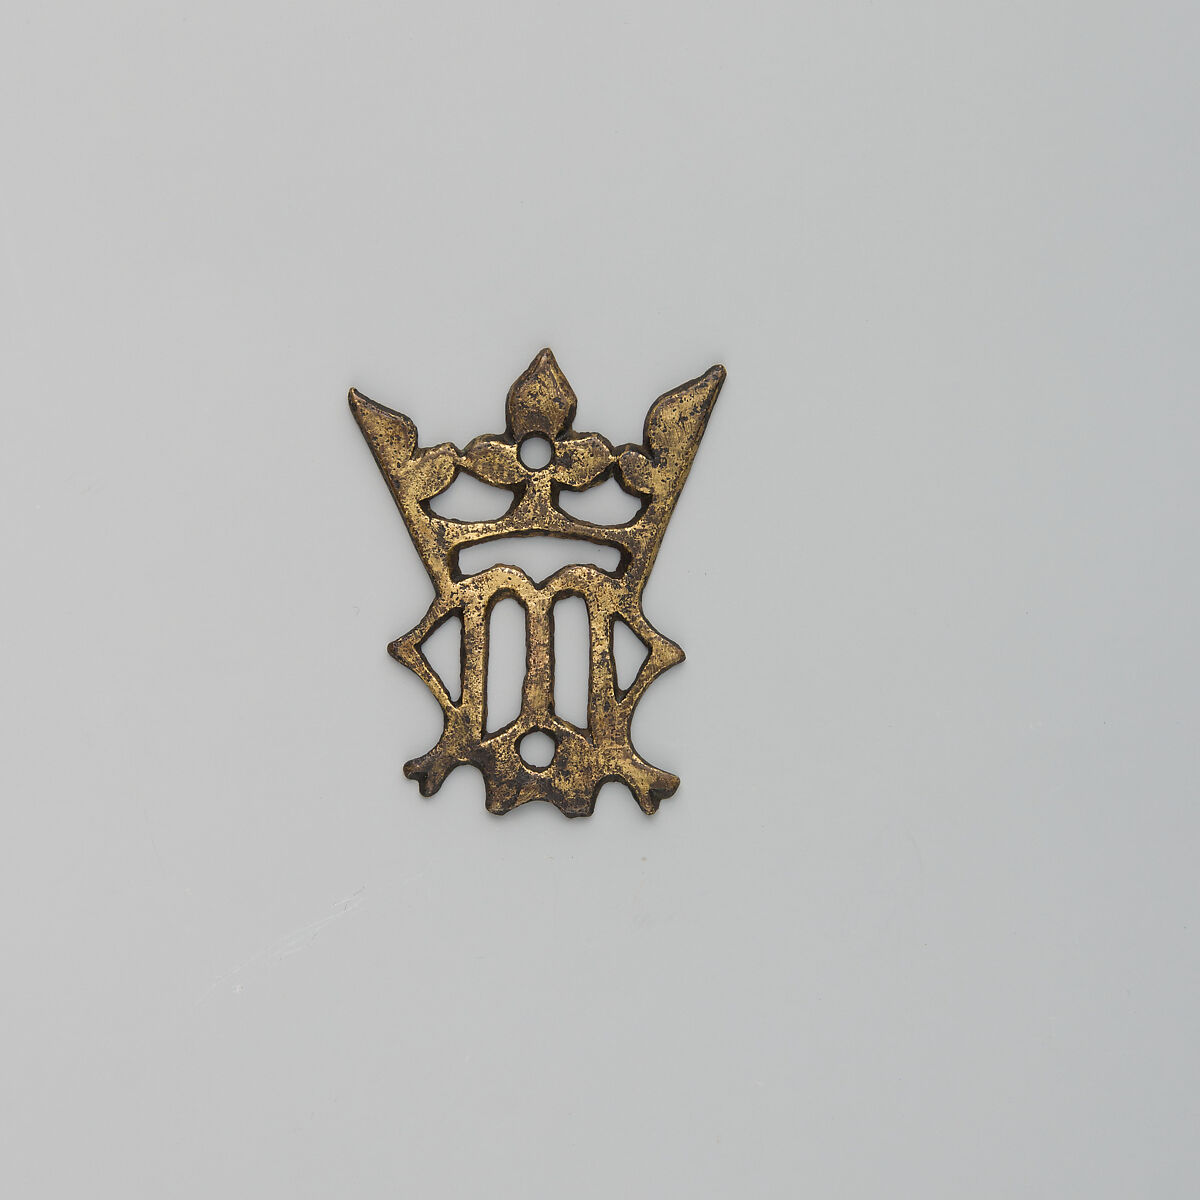 Badge or Harness Pendant, Copper, gold, possibly Spanish 